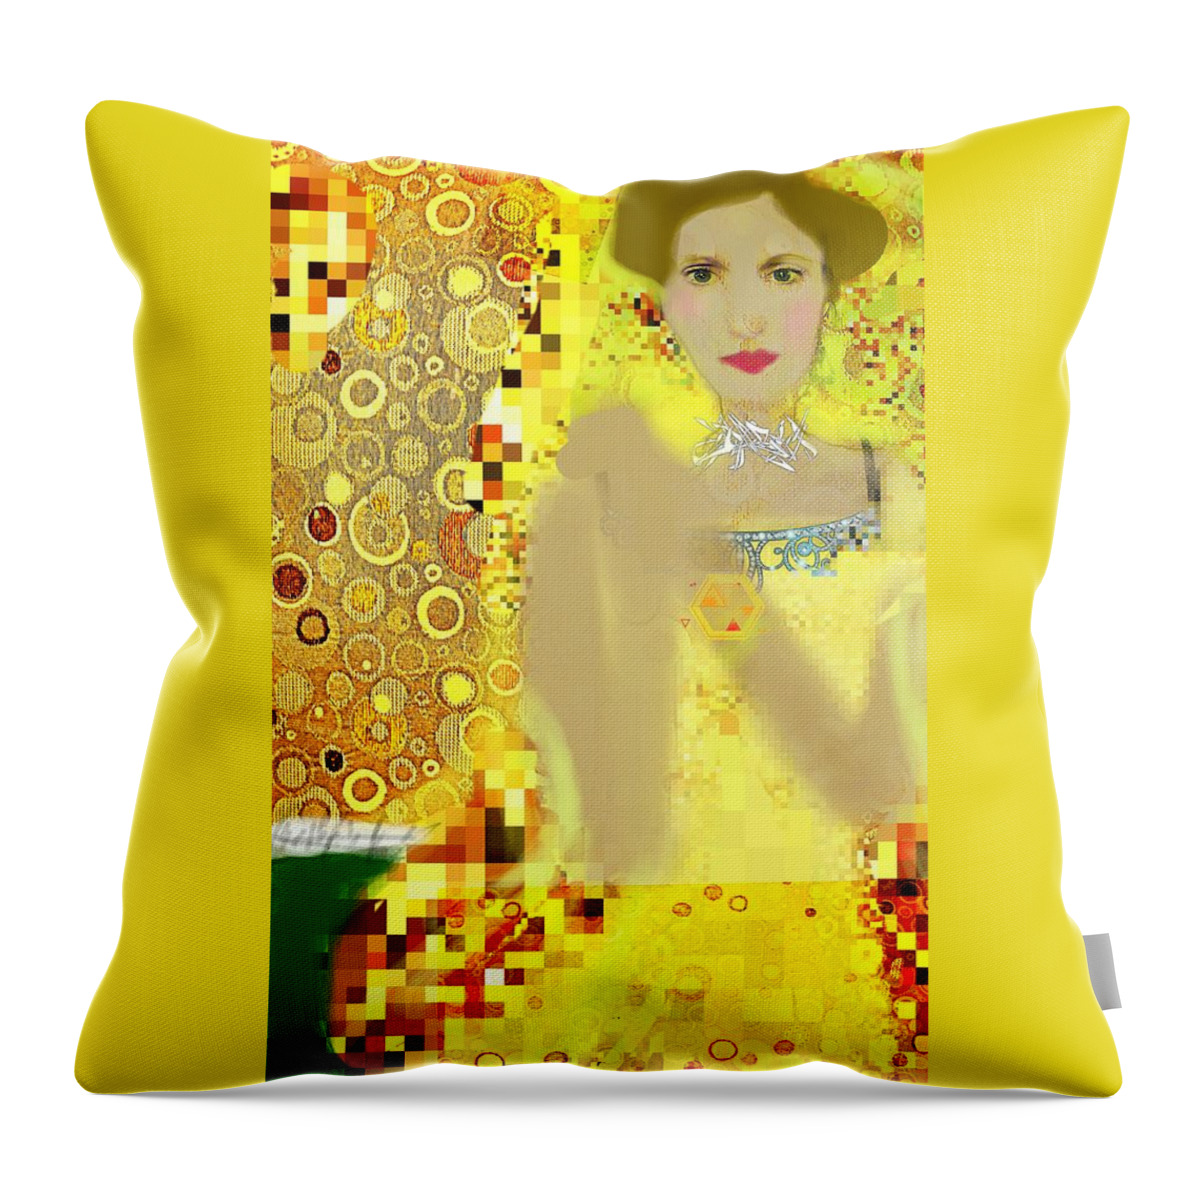 Adele Block Bauer Throw Pillow featuring the digital art Lady In Gold Whimsy by Pamela Smale Williams